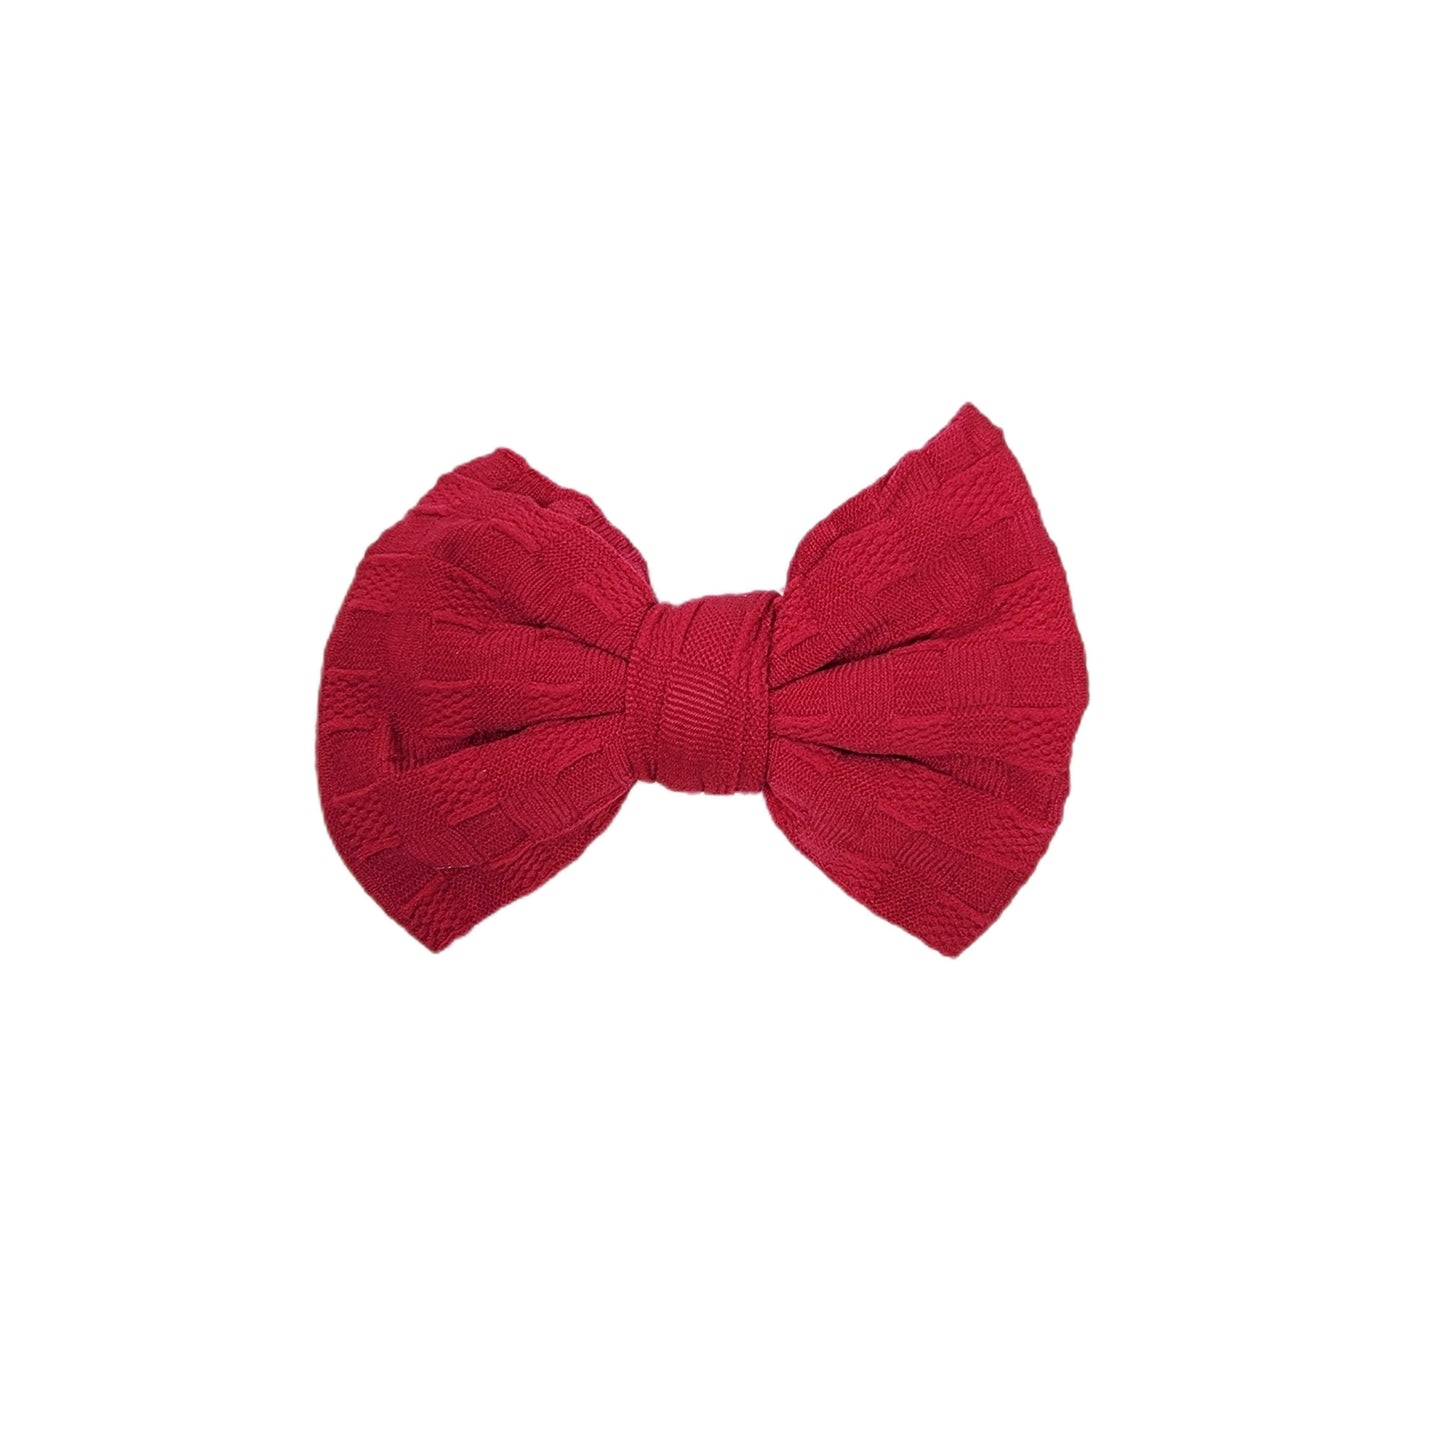 Cranberry Woven Knit Fabric Bow 4" 